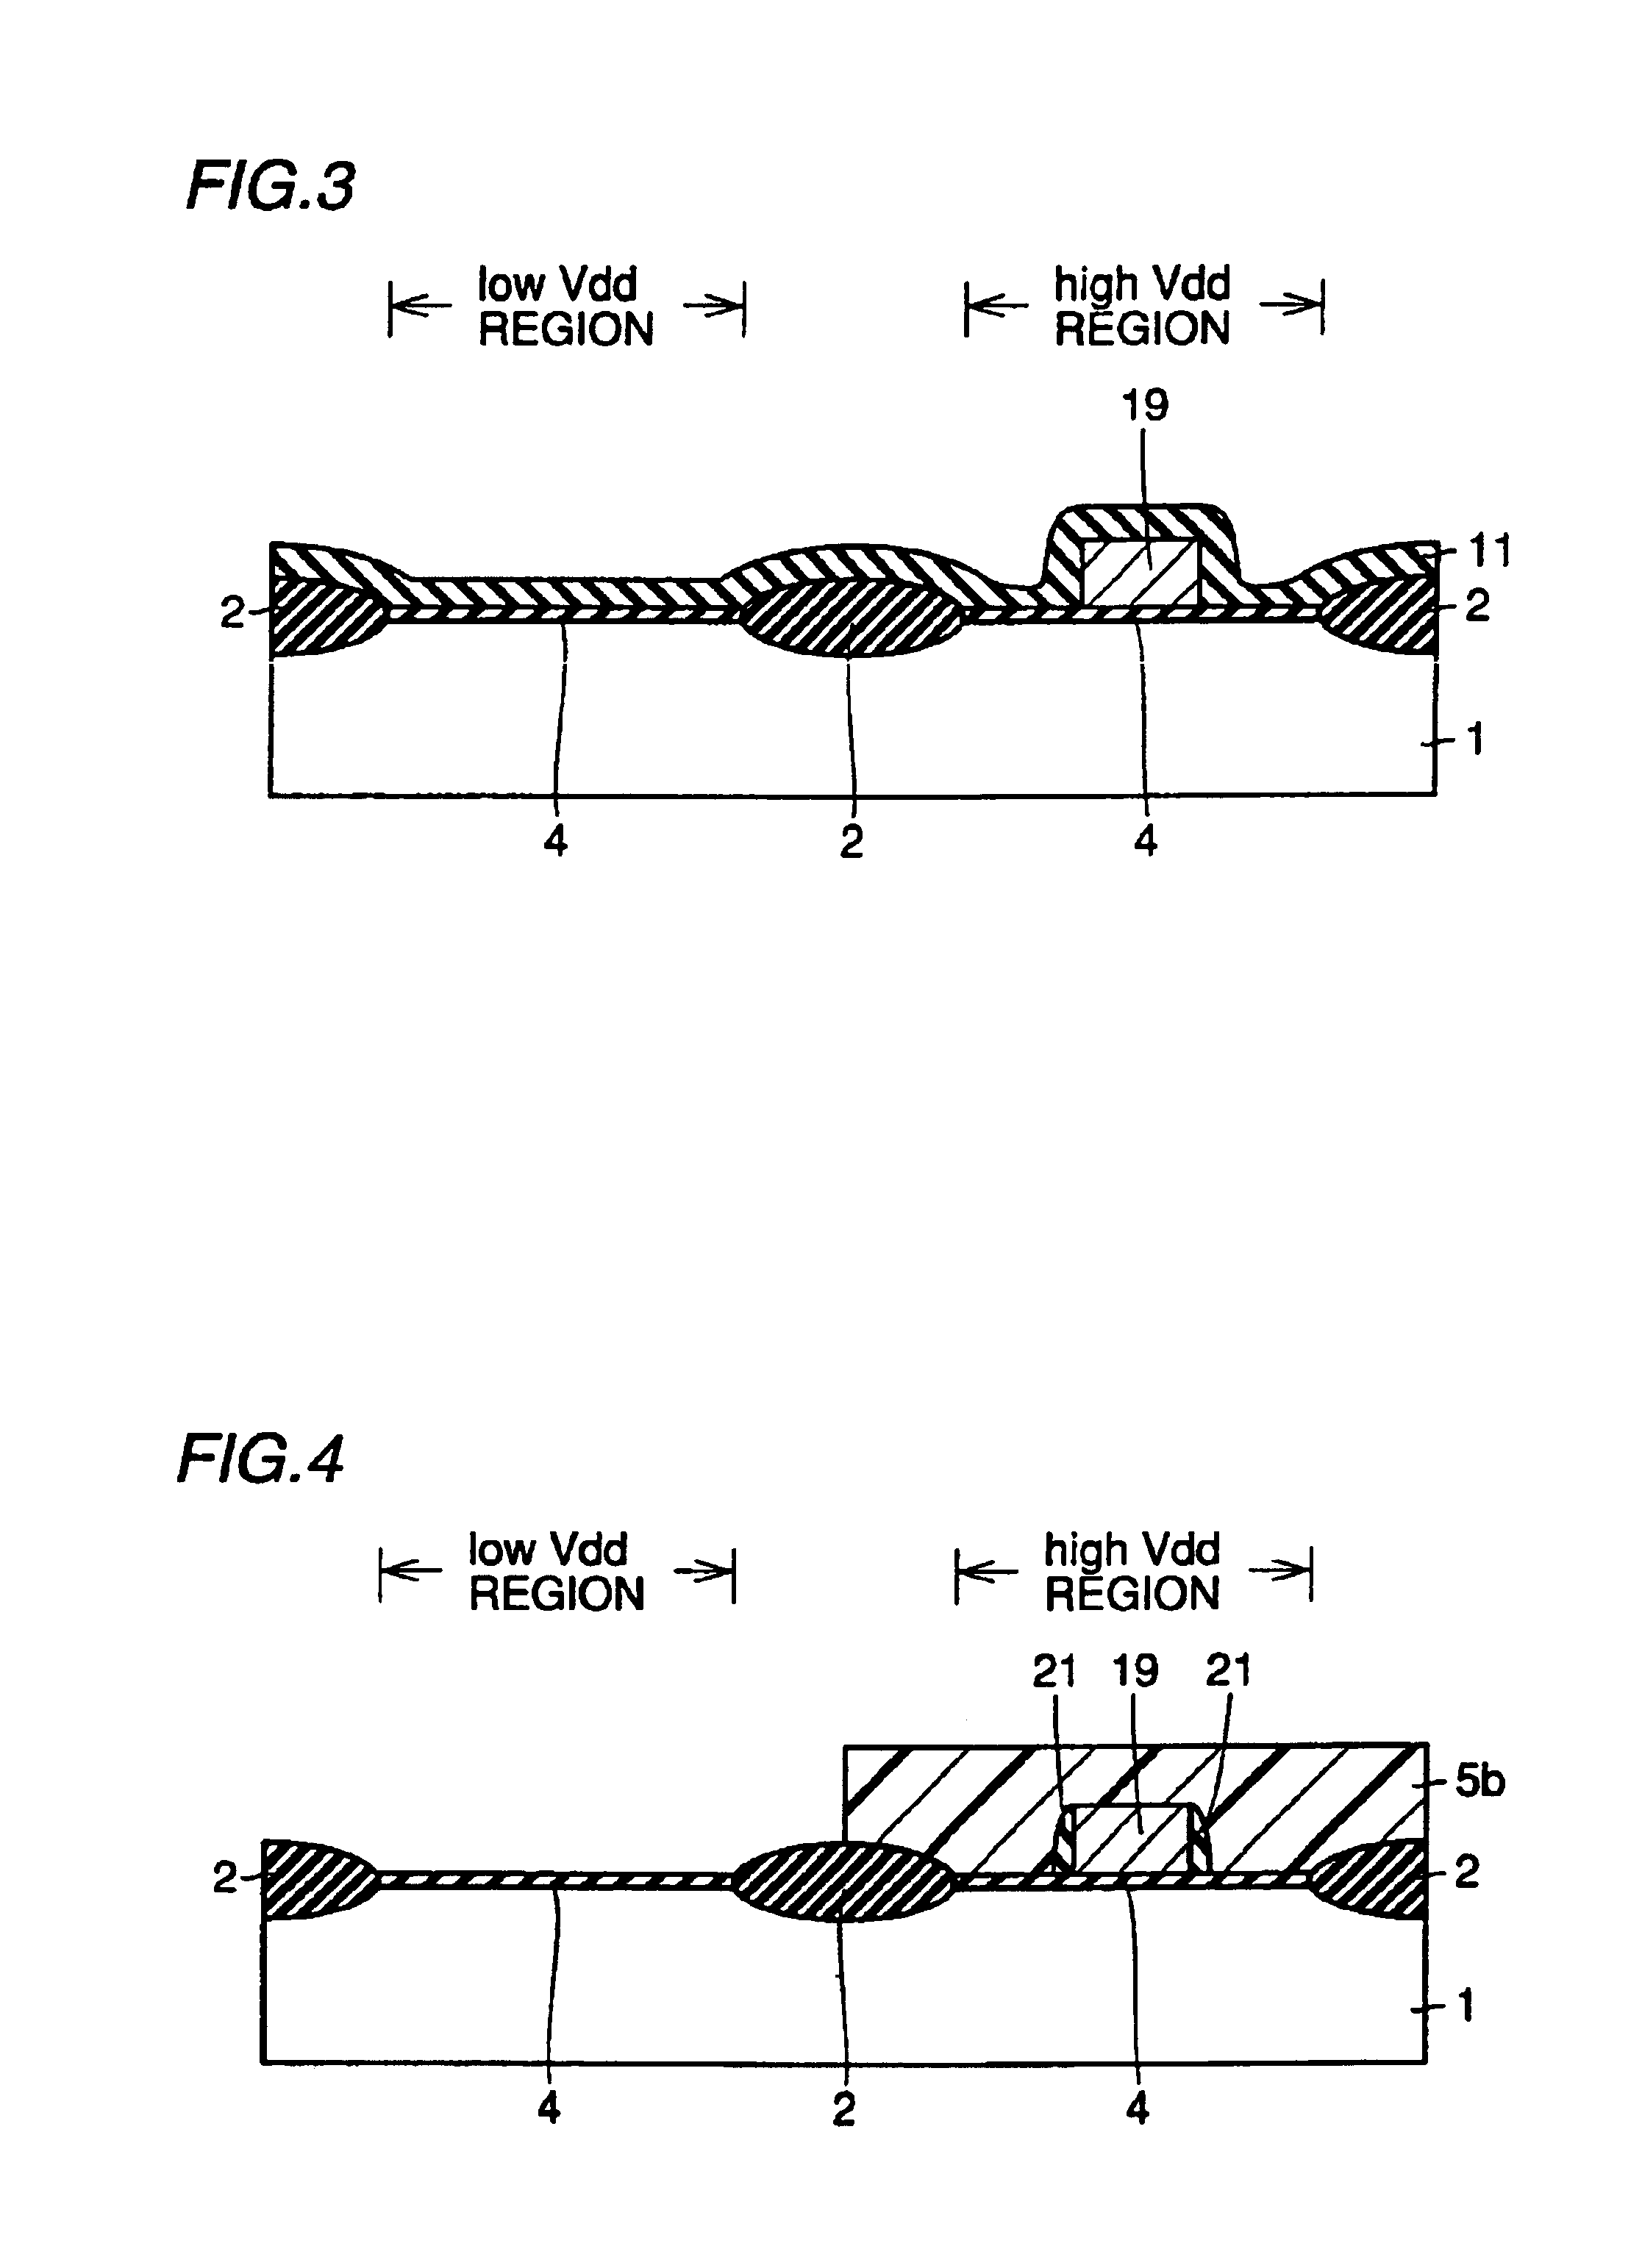 Semiconductor device including multiple field effect transistors, with first FETs having oxide spacers and the second FETs having oxide nitride oxidation protection